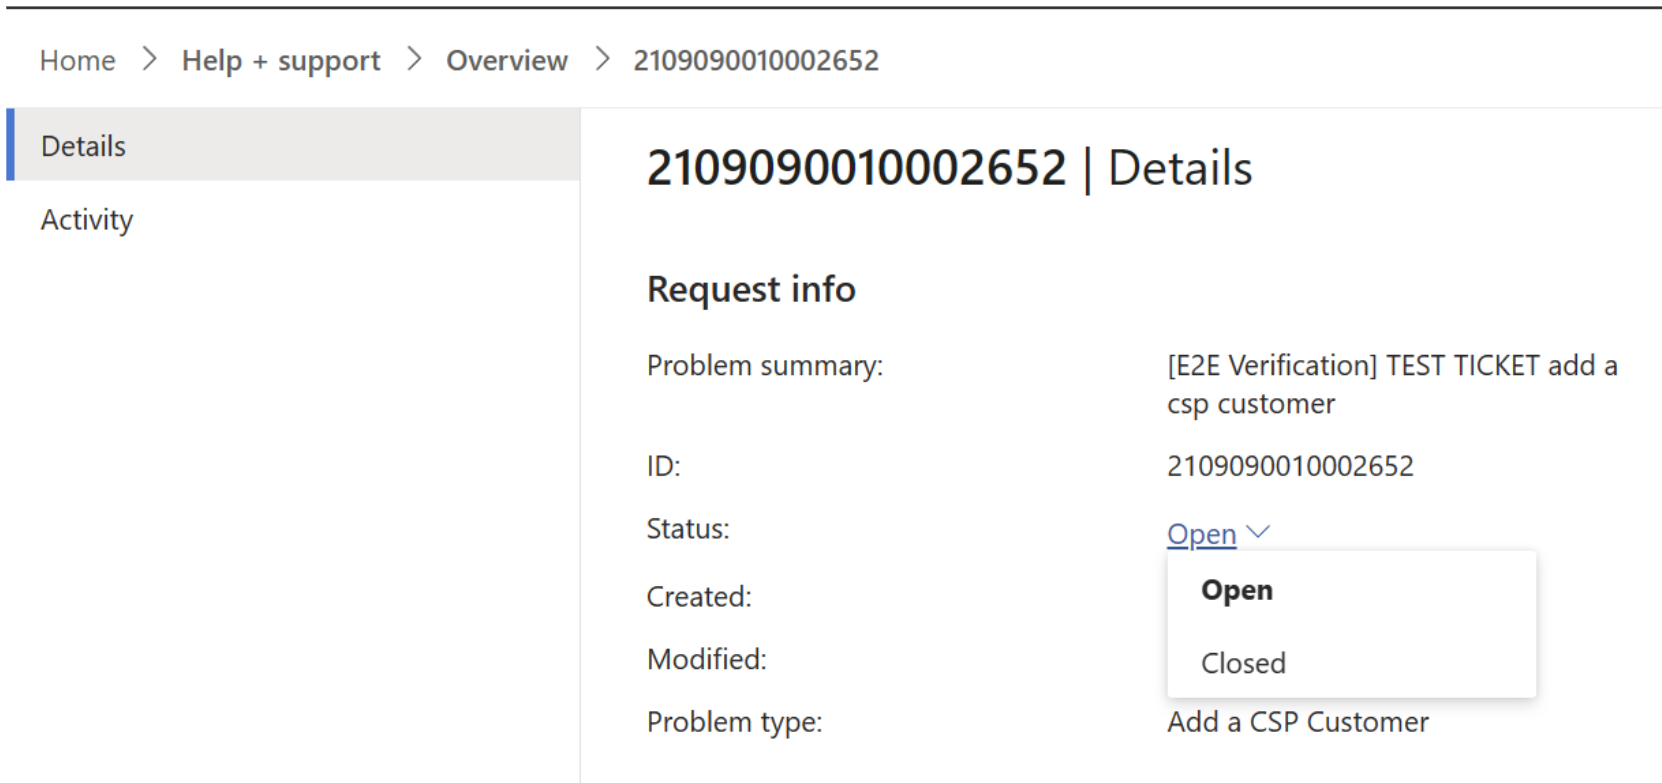 Screenshot showing the Details page of a sample support request.